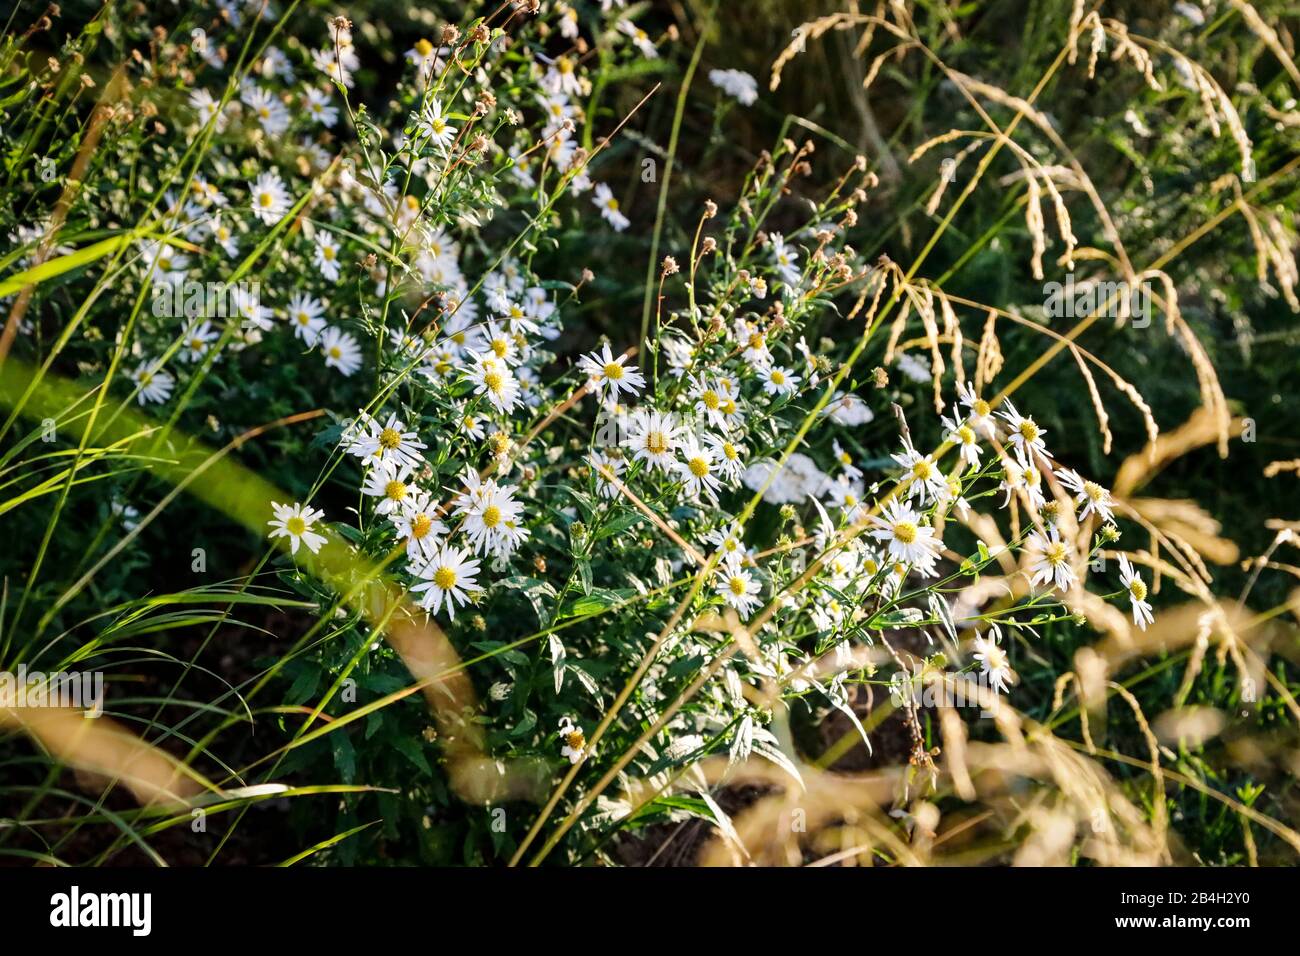 A bed of wild perennials and grasses in harmony Stock Photo